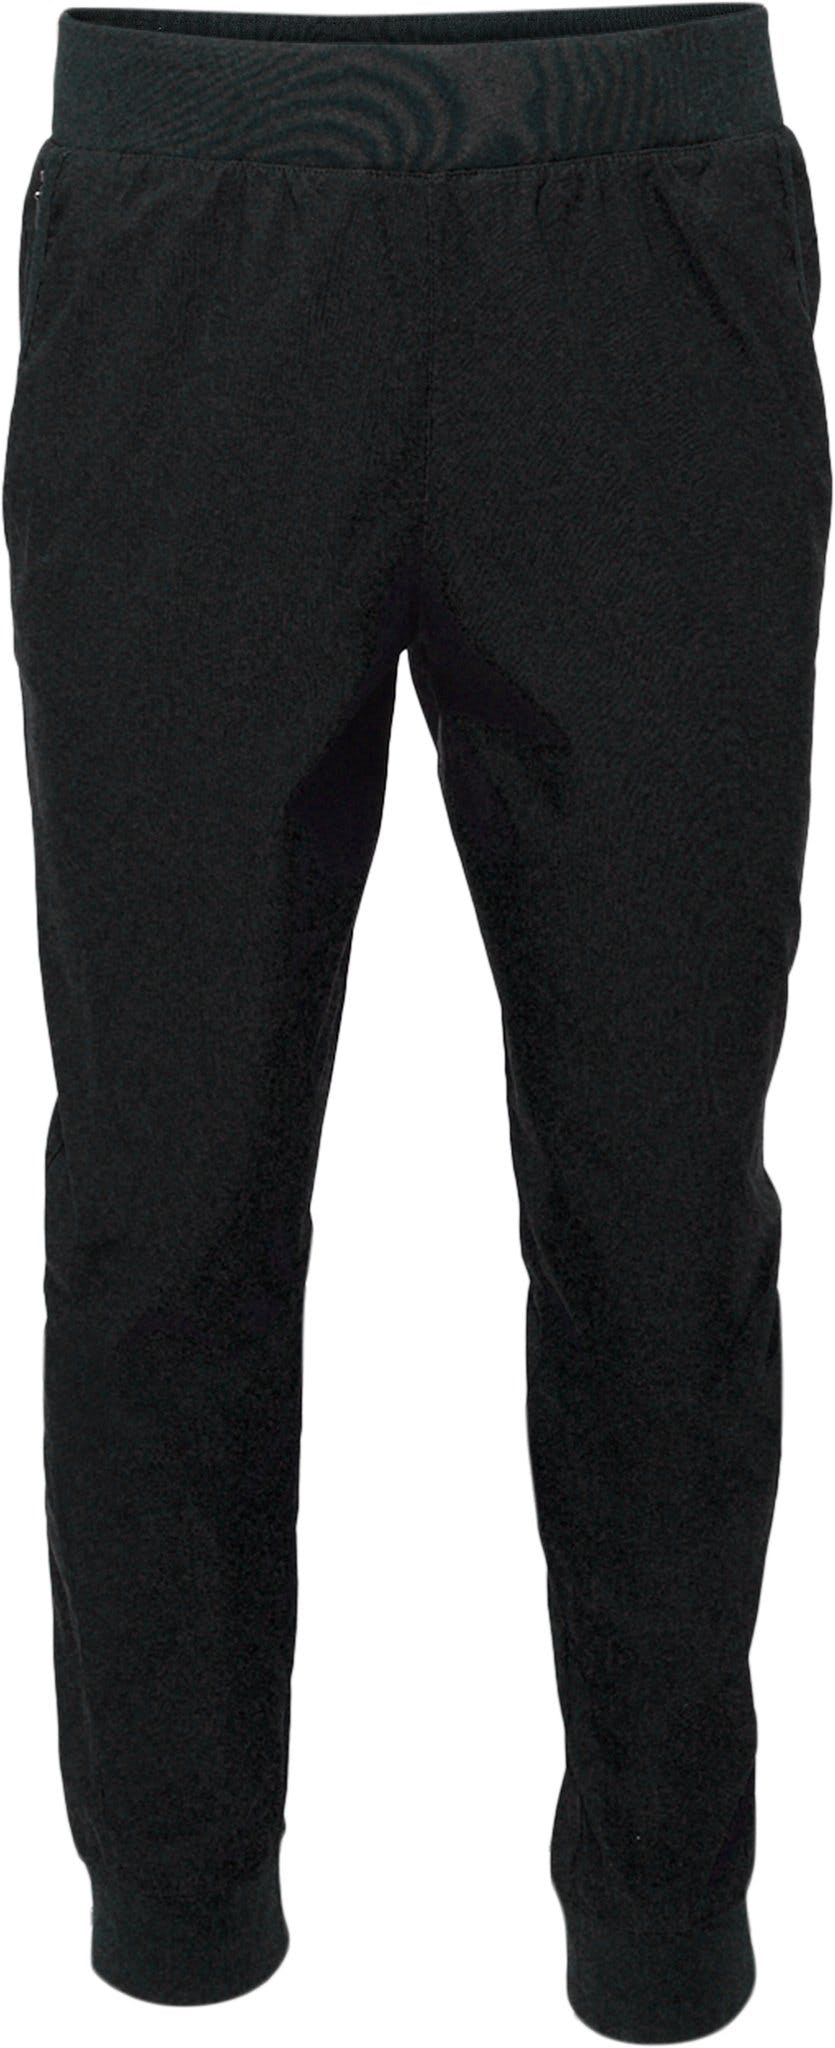 Product image for Leslie Falls™ Jogger - Women's